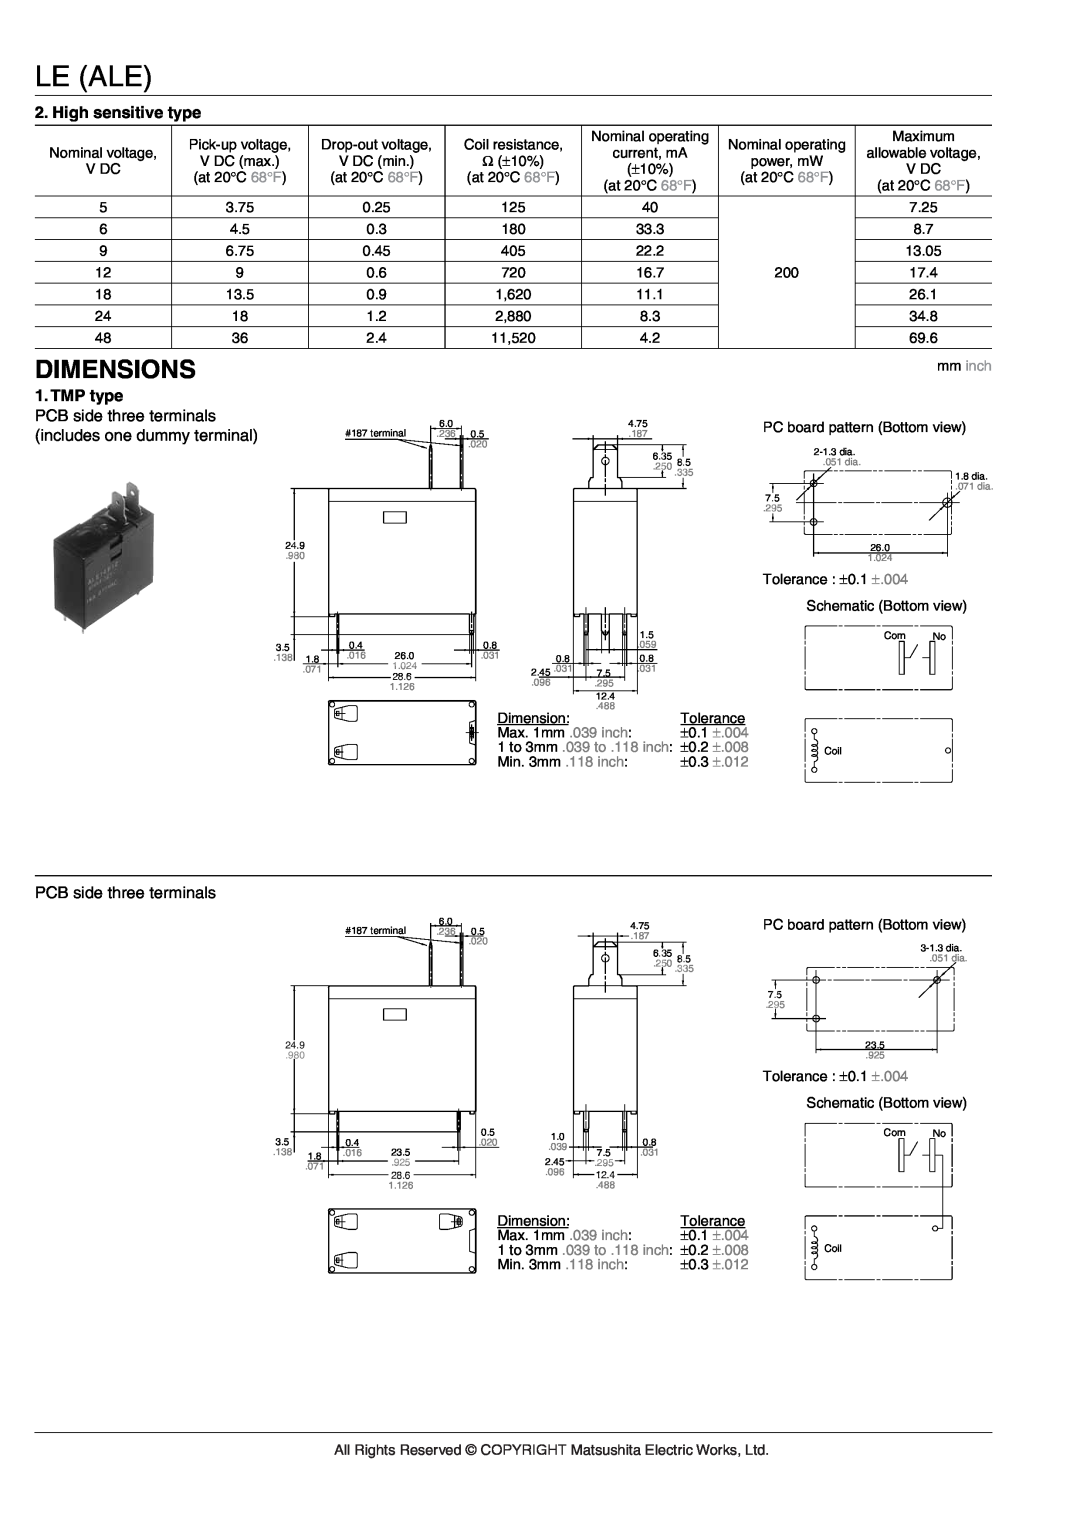 Panasonic LE Relays specifications Dimensions, Le Ale, mm inch, ±.004, 1 to 3mm .039 to .118 inch, ±.008, ±.012 